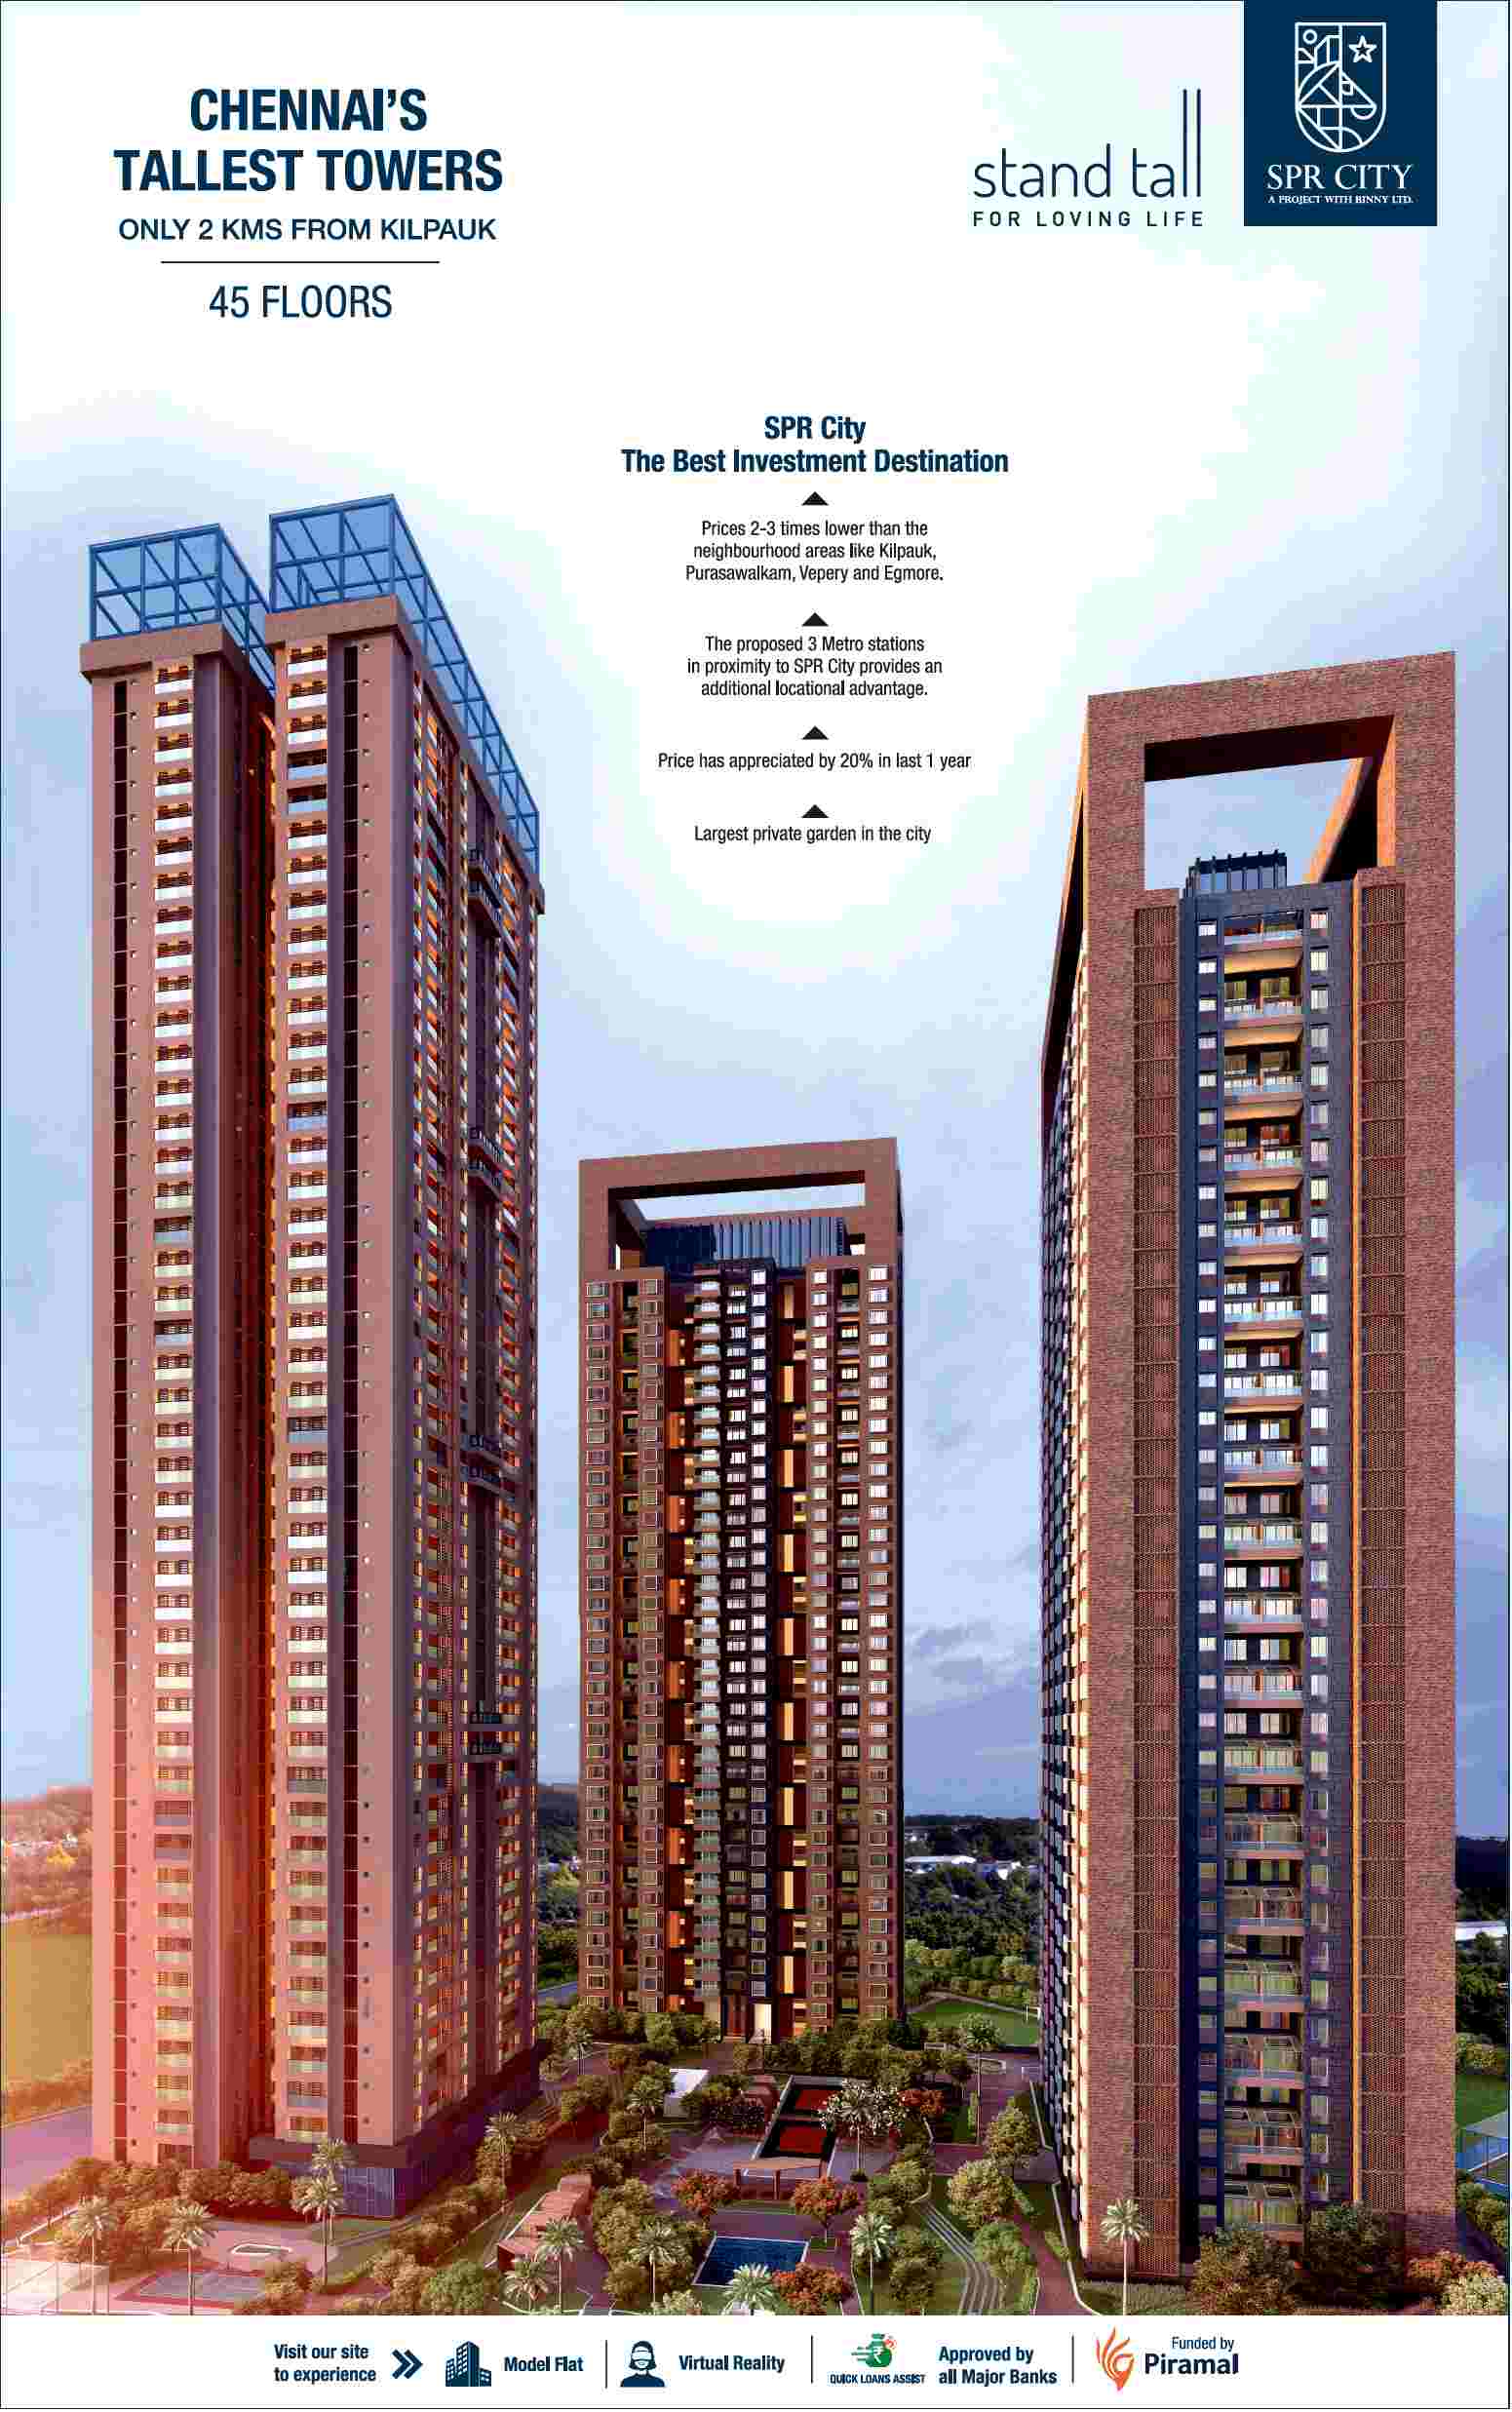 Book luxury apartments starting at a base price of Rs. 90 Lakhs at SPR City Highliving District in Chennai Update